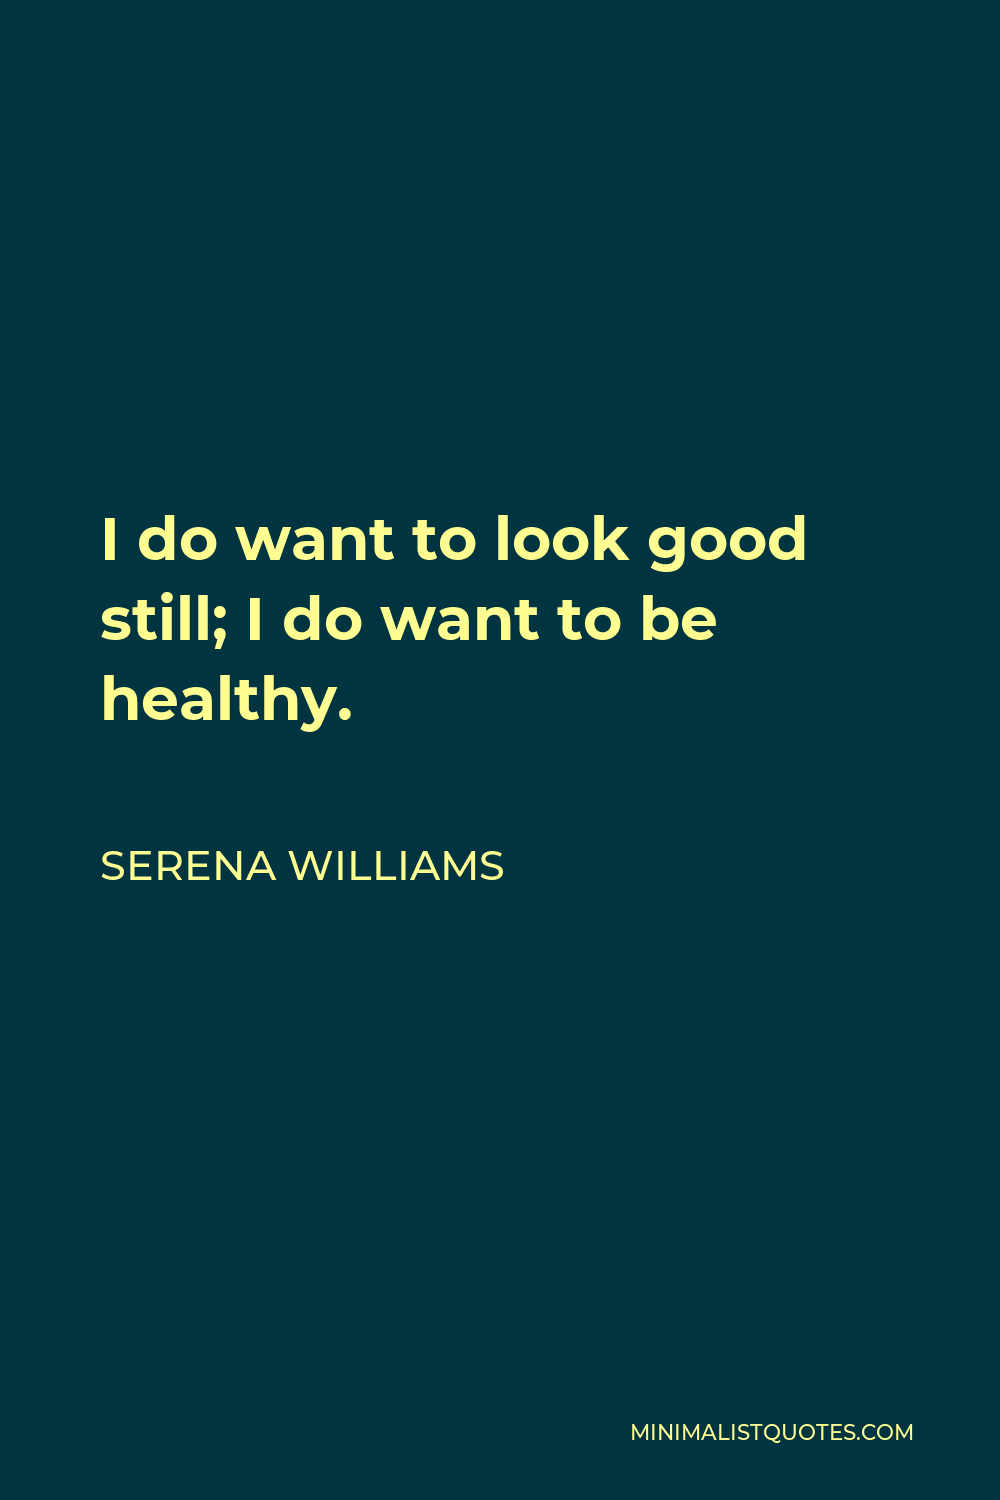 Serena Williams Quote - I do want to look good still; I do want to be healthy.